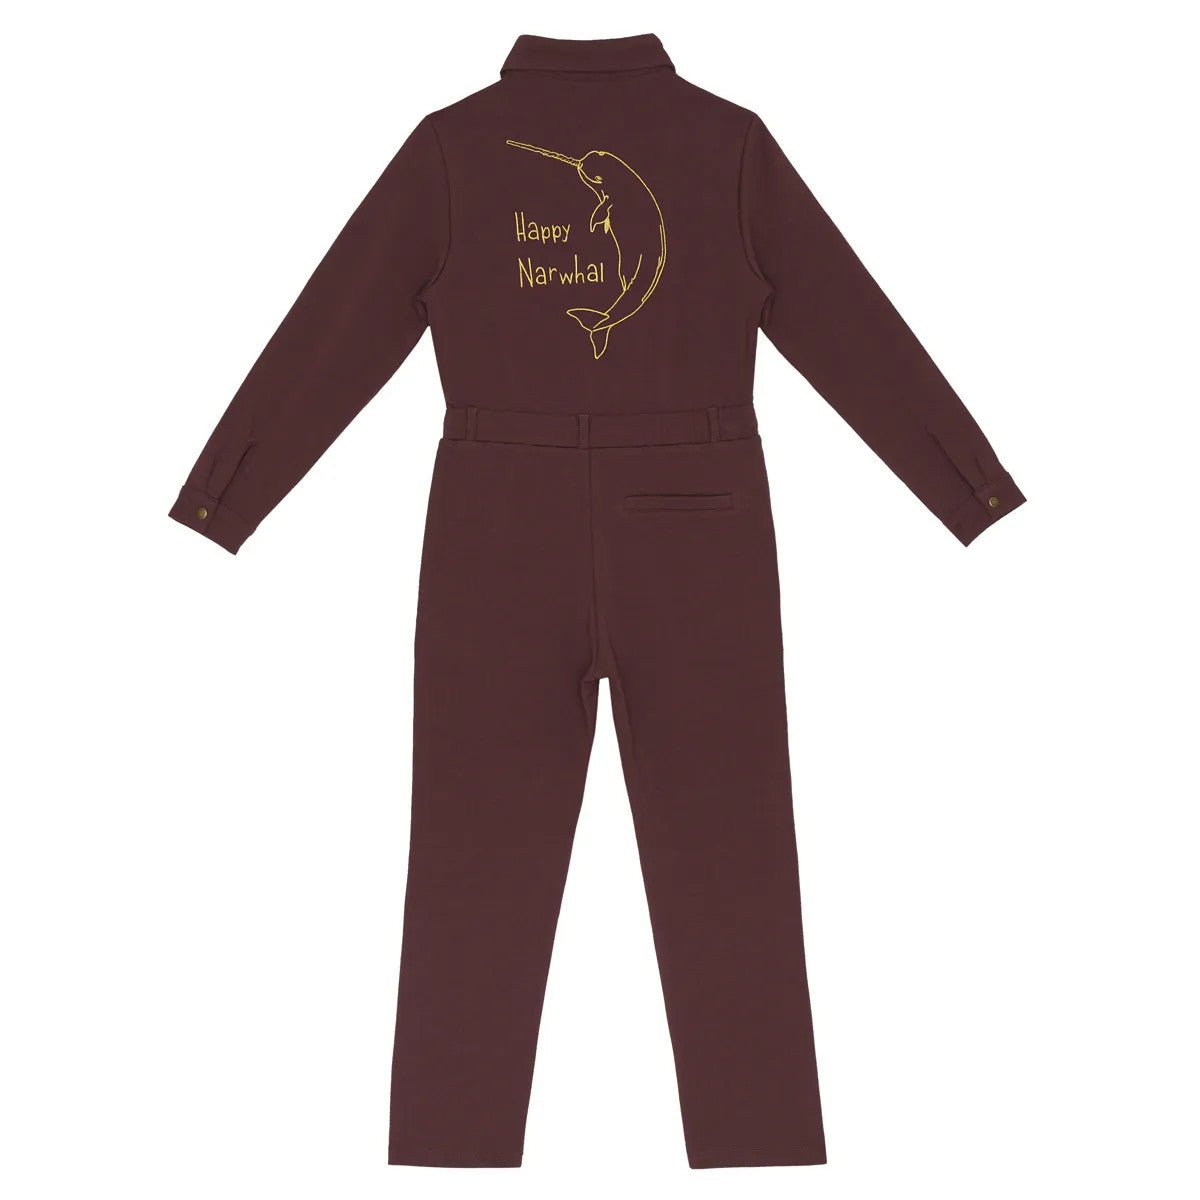 The perfect Little Hedonist overall in Tawny Port. In organic stretchy sweat fabric, straight fit with slim legs. Featuring a flat collar, push buttons and patch pockets.